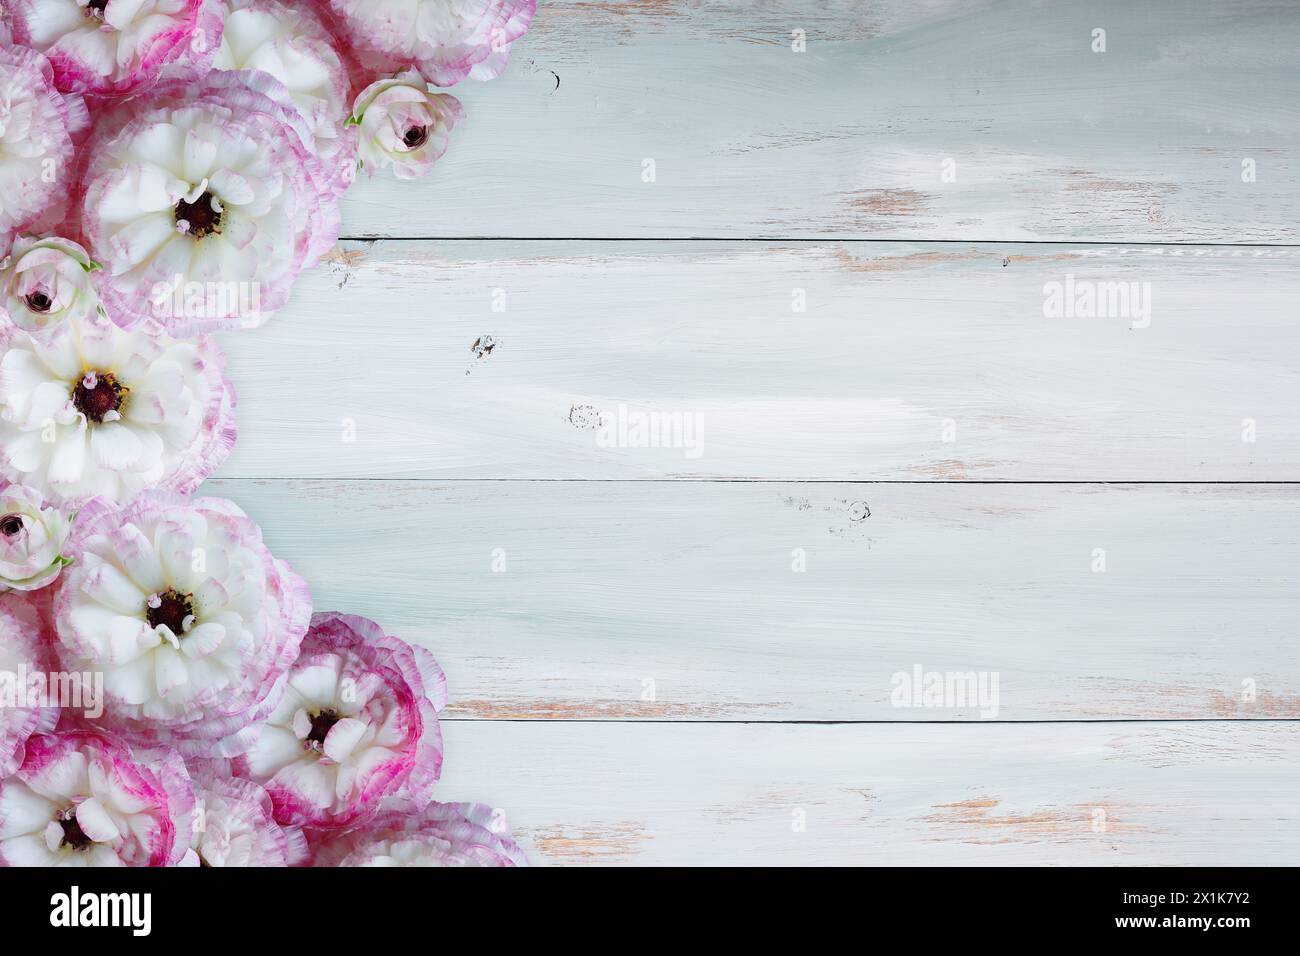 Pink and white ruffled ranunculus over a blue and white rustic wooden background table. Overhead top view. Stock Photo